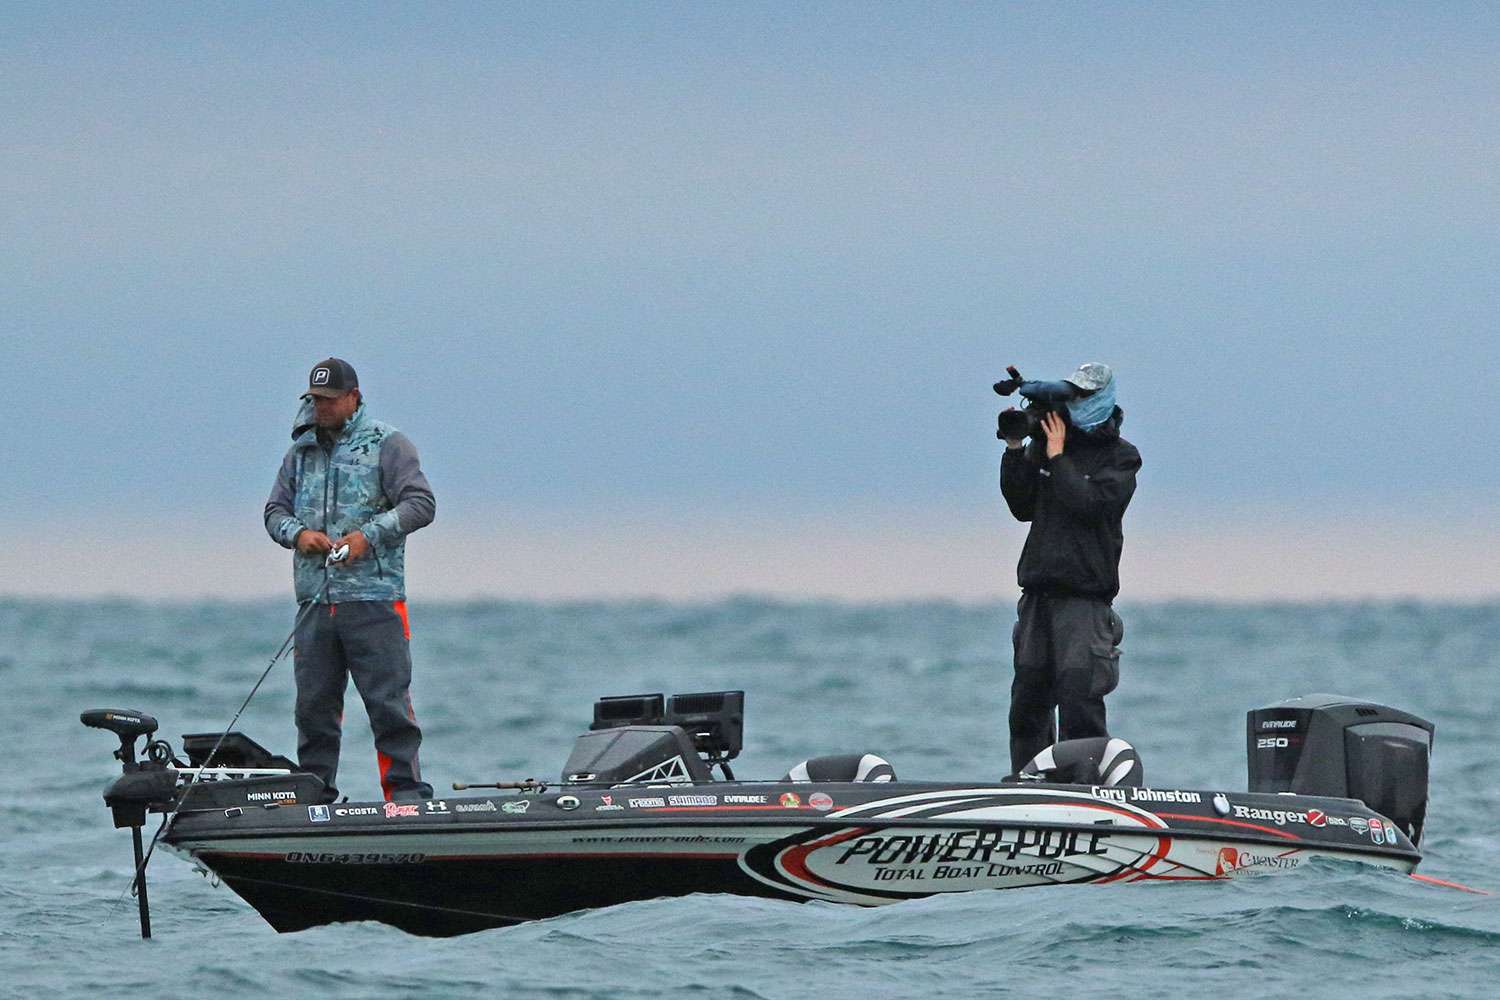 Follow Cory Johnston as he kicks off Day 2 of the Toyota Bassmaster Angler of the Year Championship.